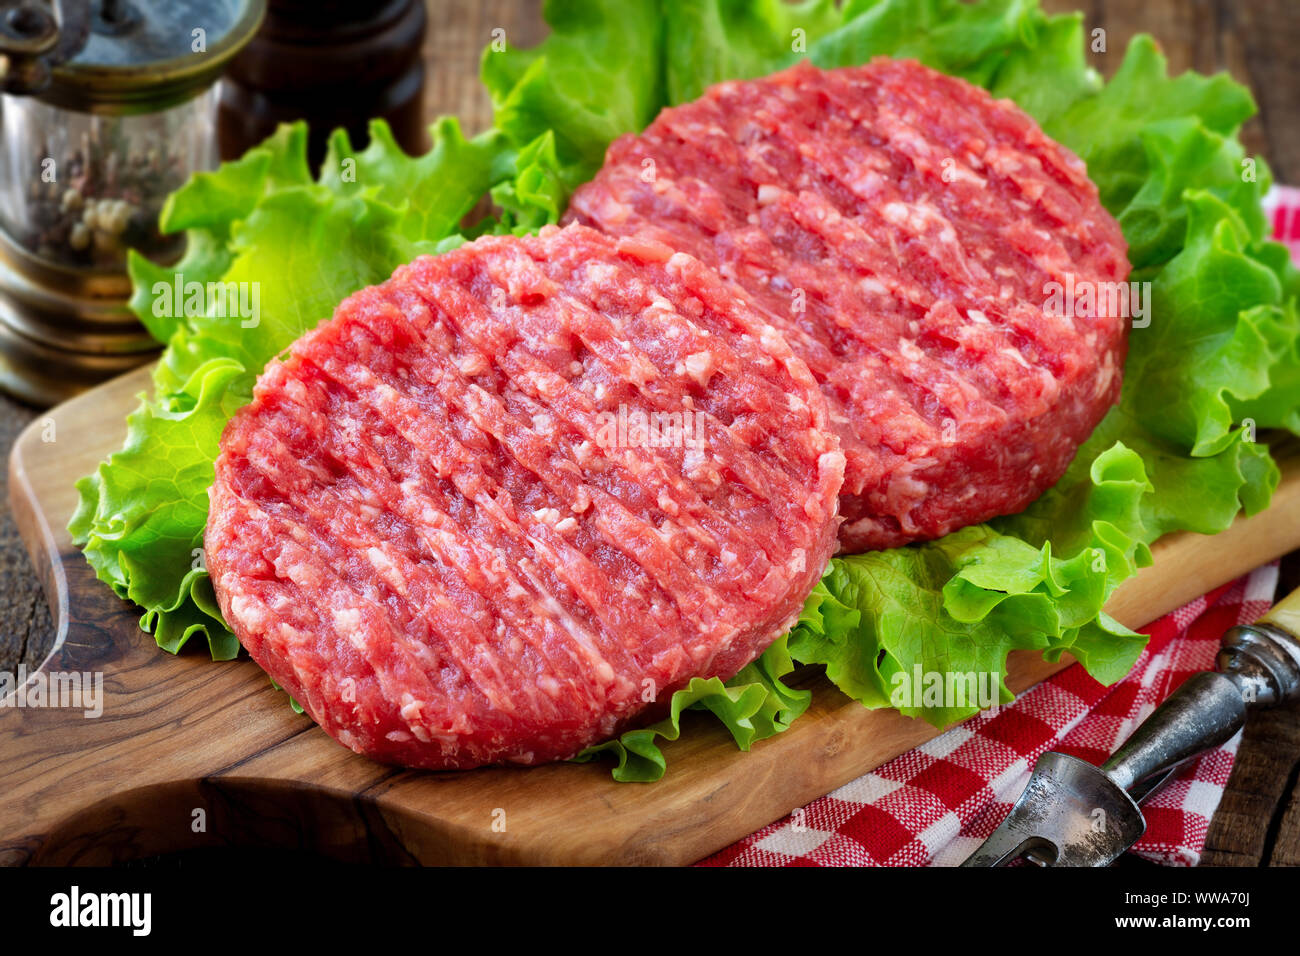 Raw mince meat beef burgers on a wooden cutting board with lettuce leaves Stock Photo